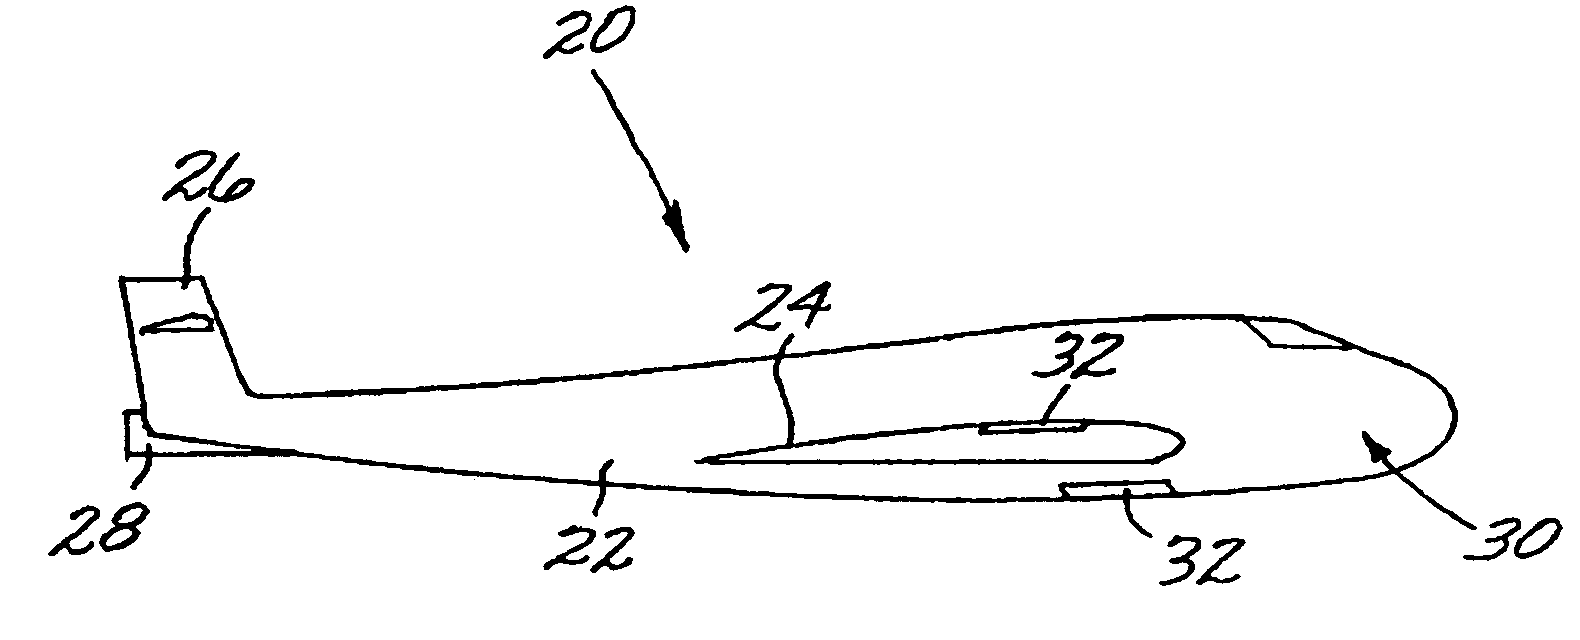 Approach for indicating the occurrence of a mechanical impact on a material, such as a low-ductility composite material